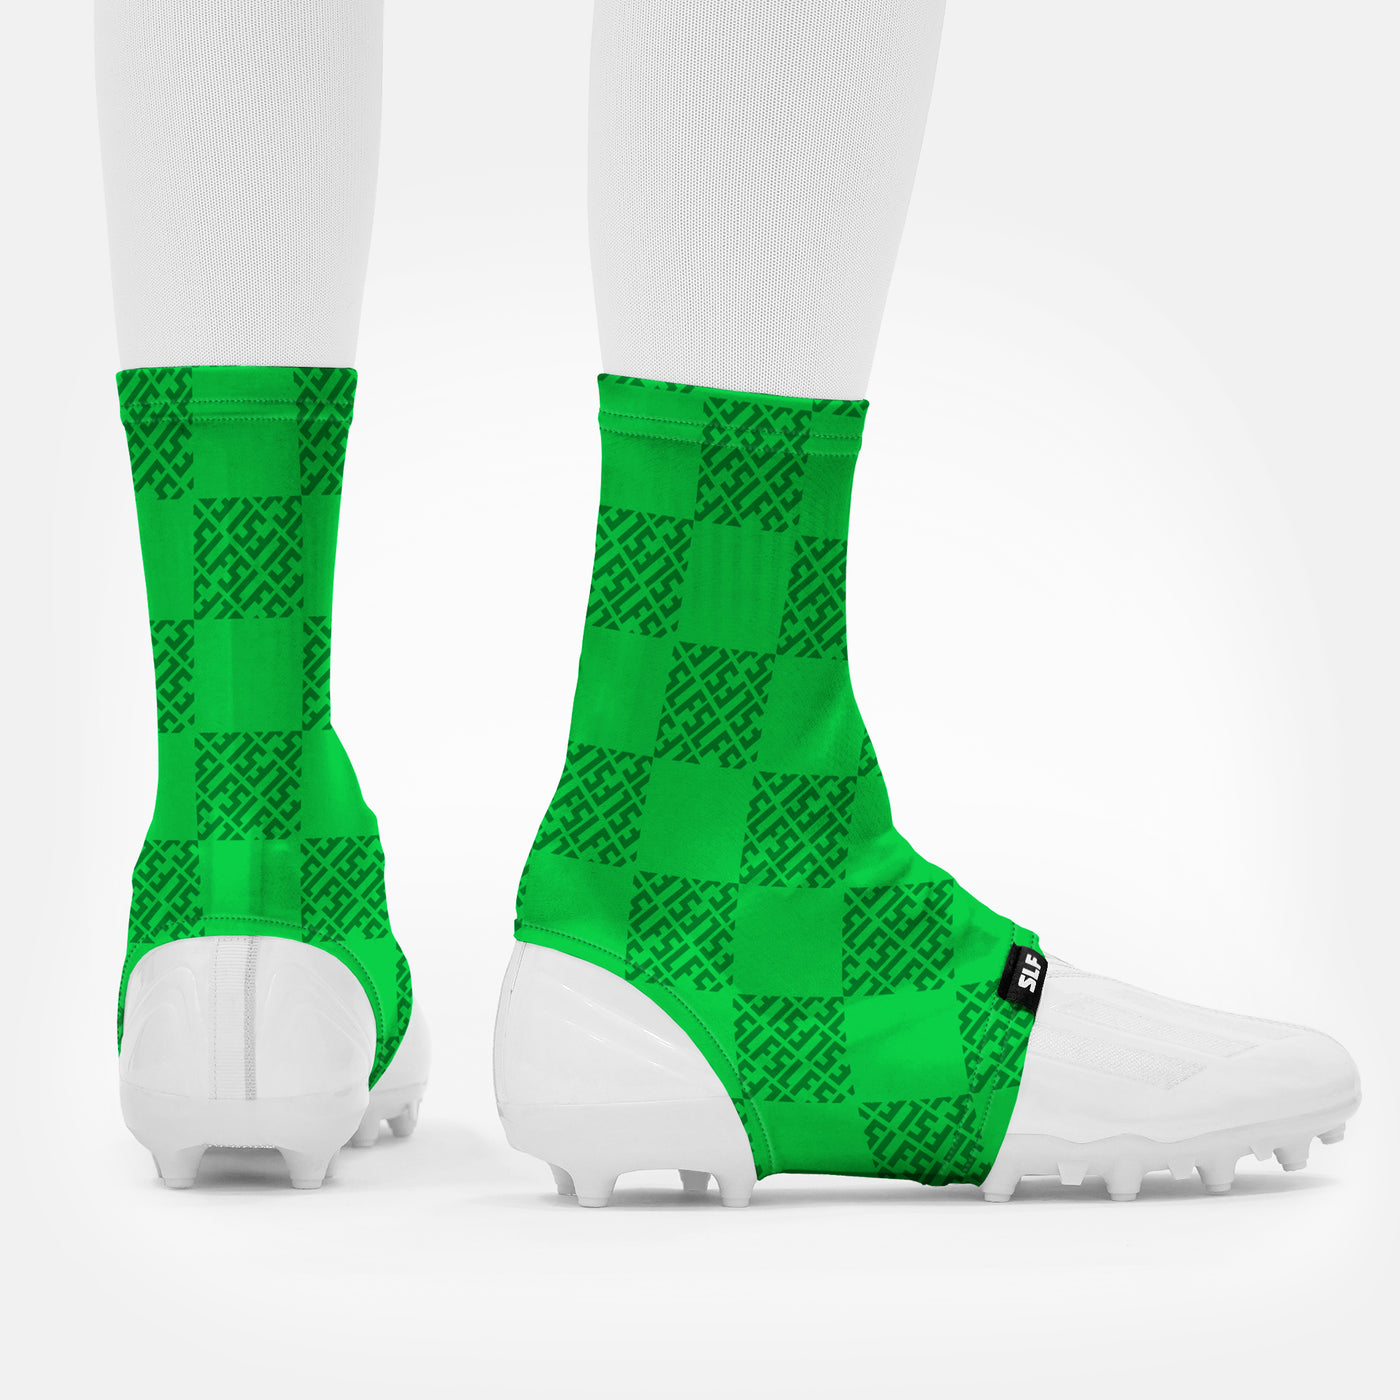 SLF Green Milan Spats / Cleat Covers